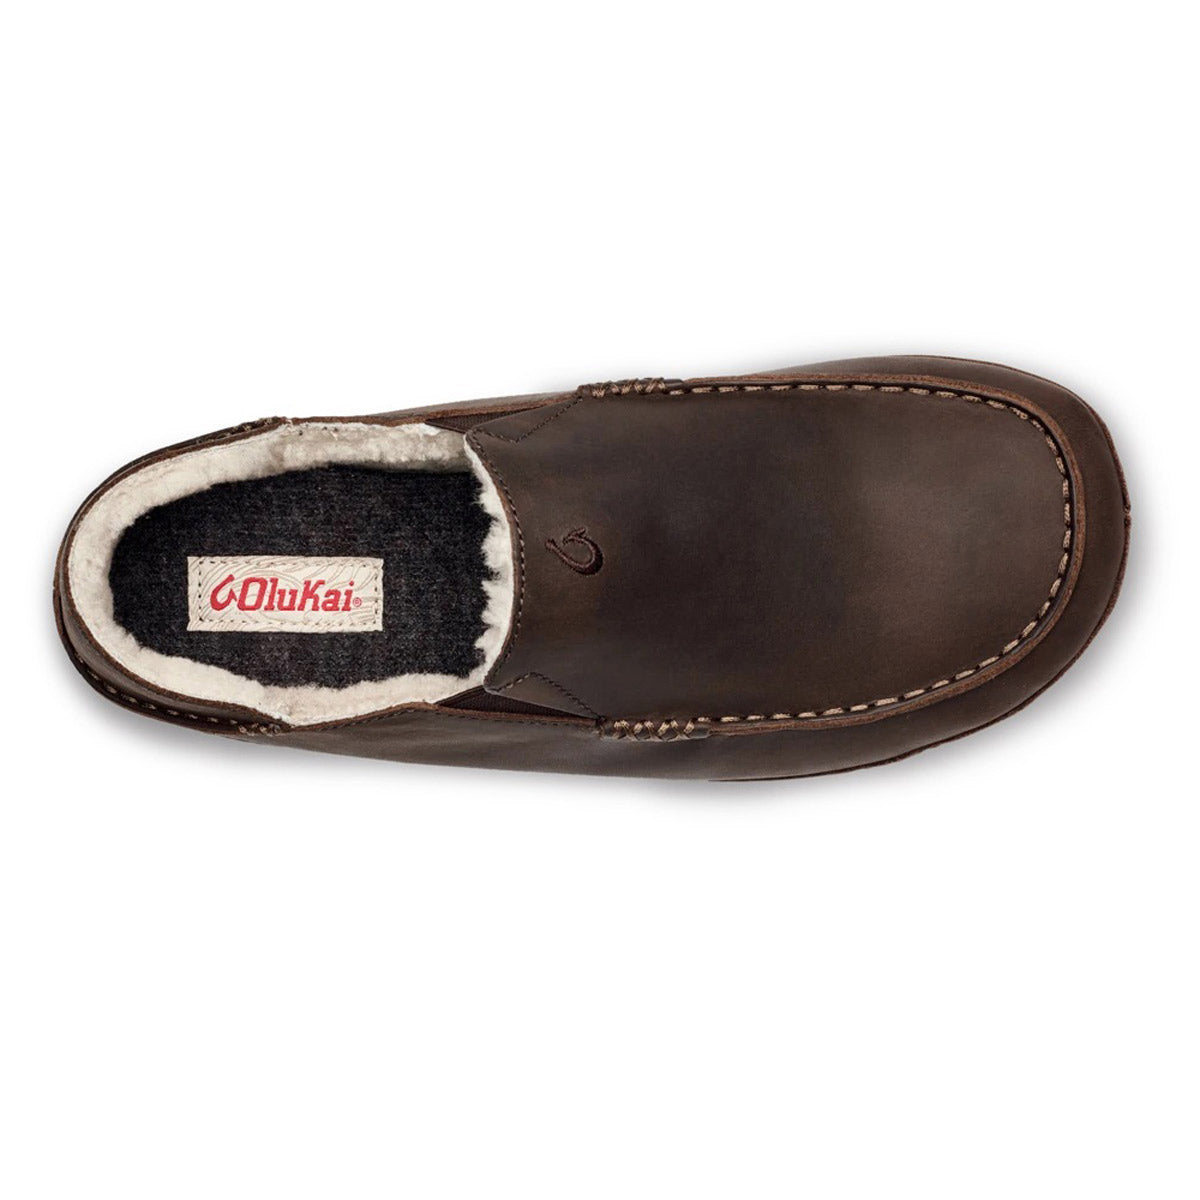 Top view of a single brown nubuck leather slipper with a shearling lining and a visible Olukai Moloa Slipper Dark Wood - Mens brand label.